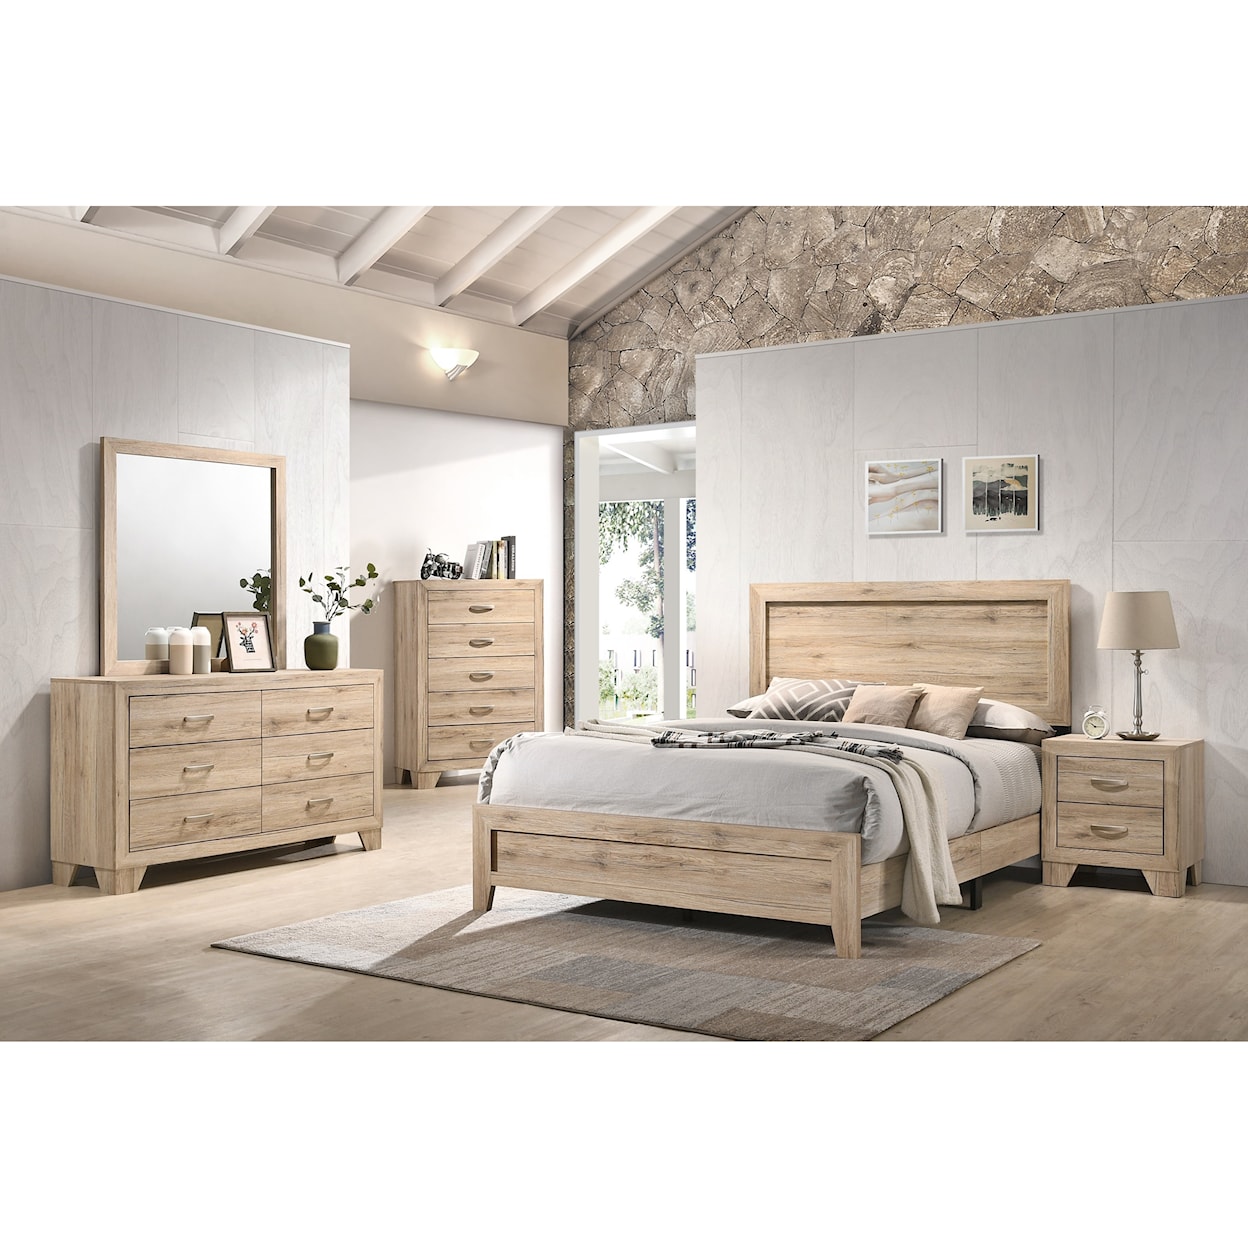 Acme Furniture Miquell King Bedroom Group